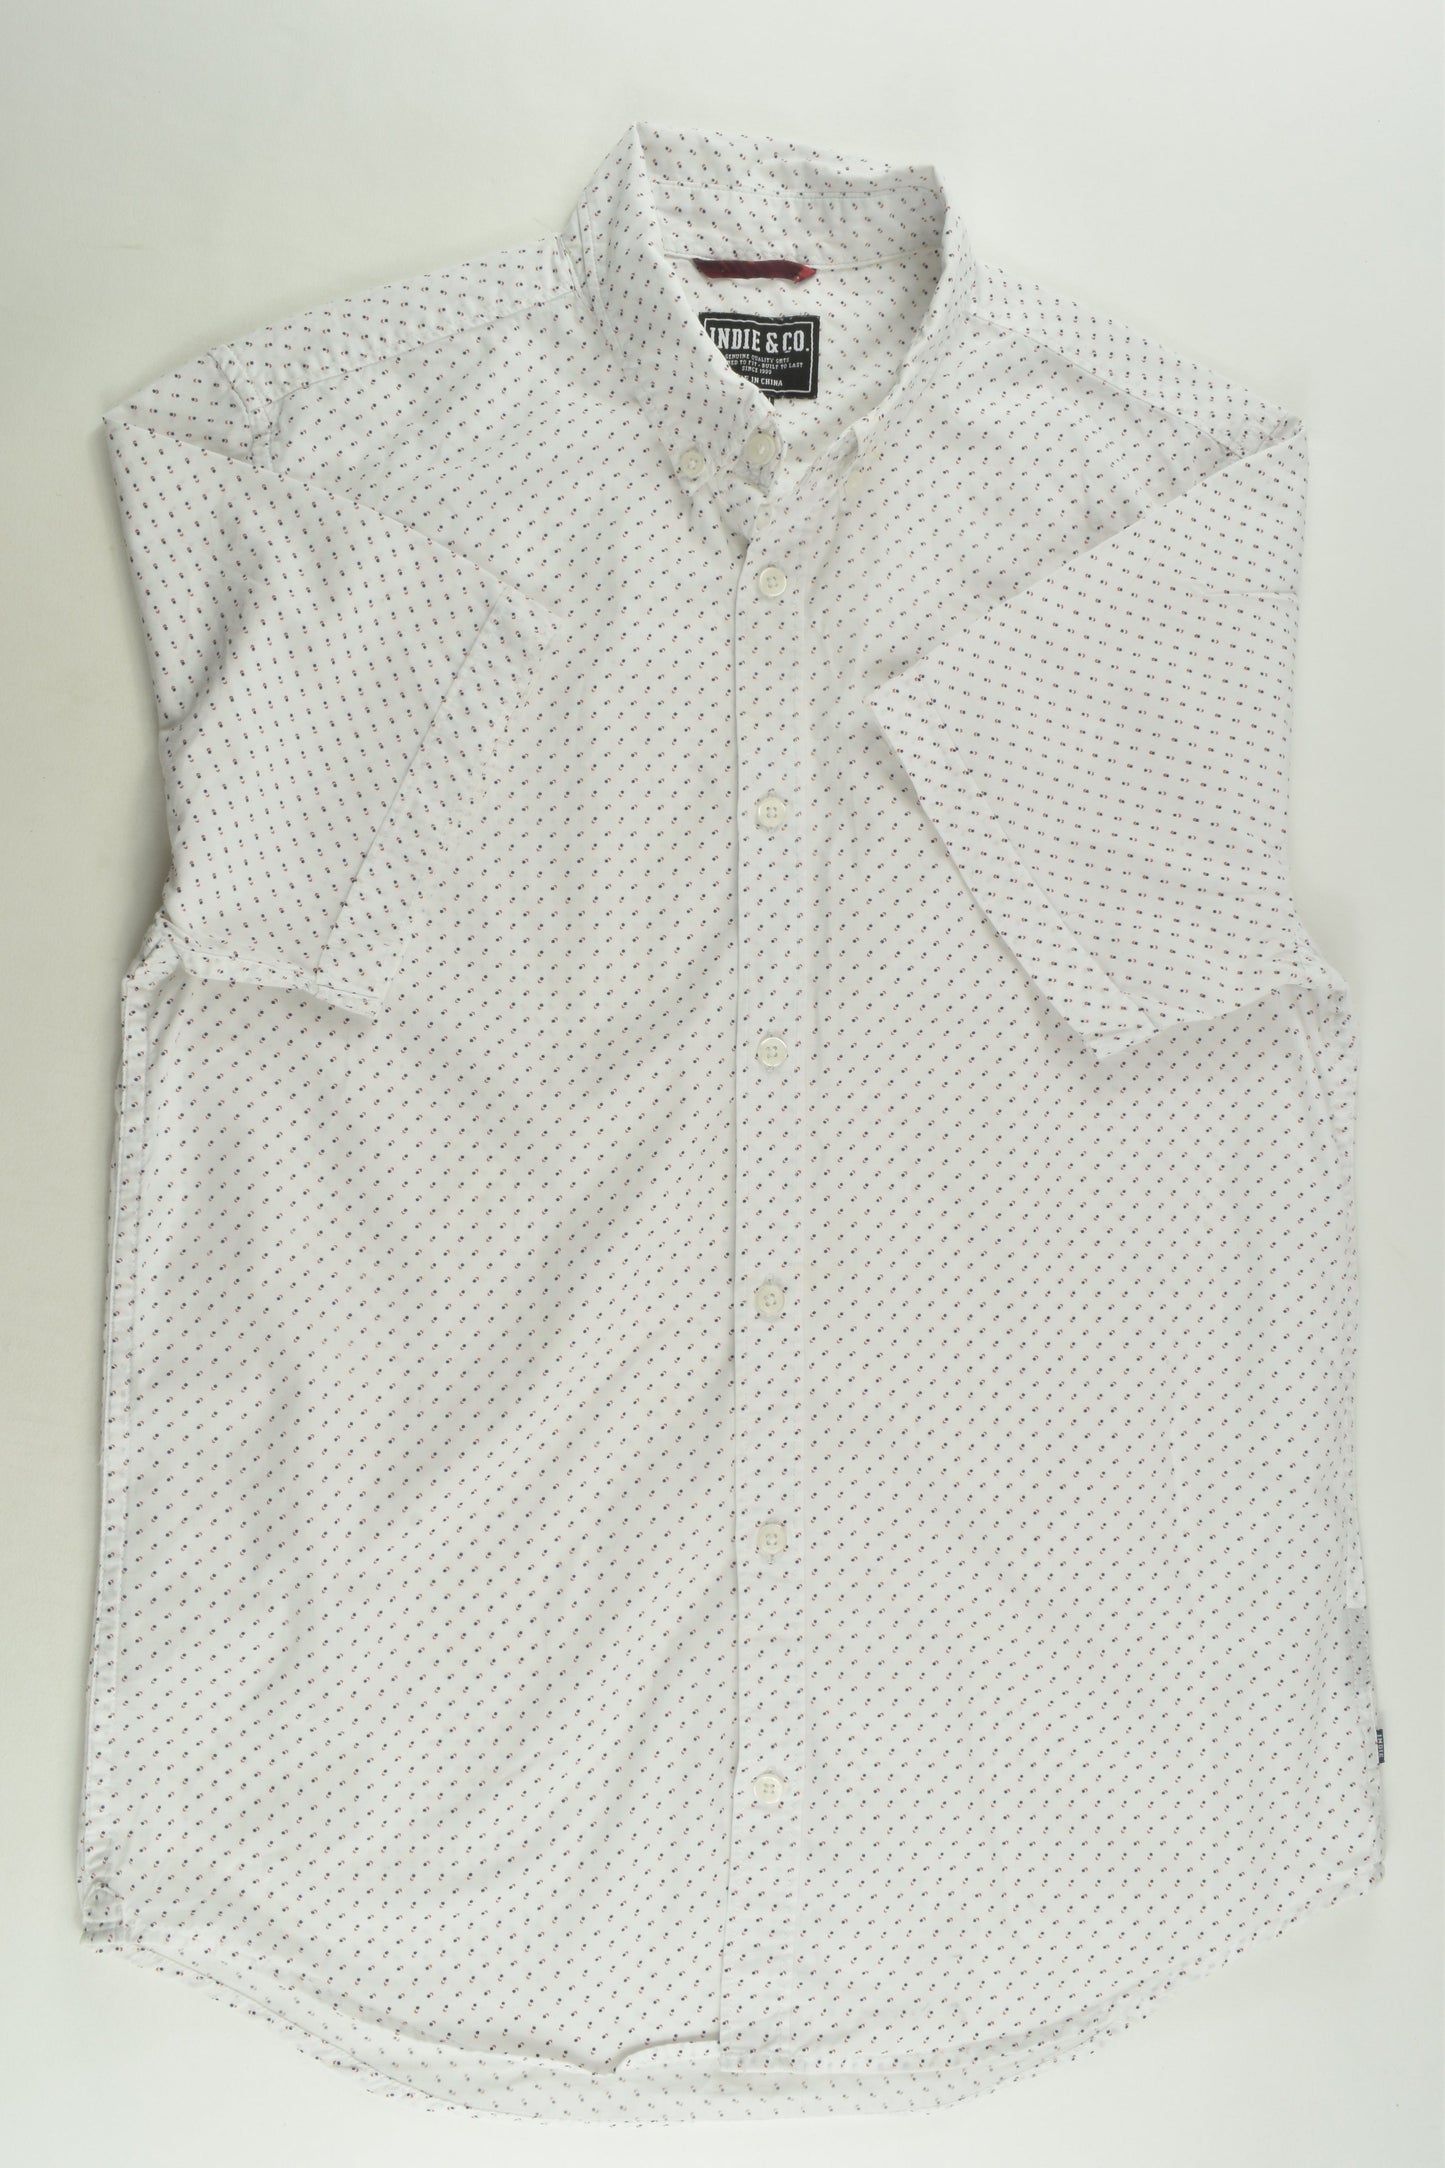 Indie & Co Size 14 Shirt